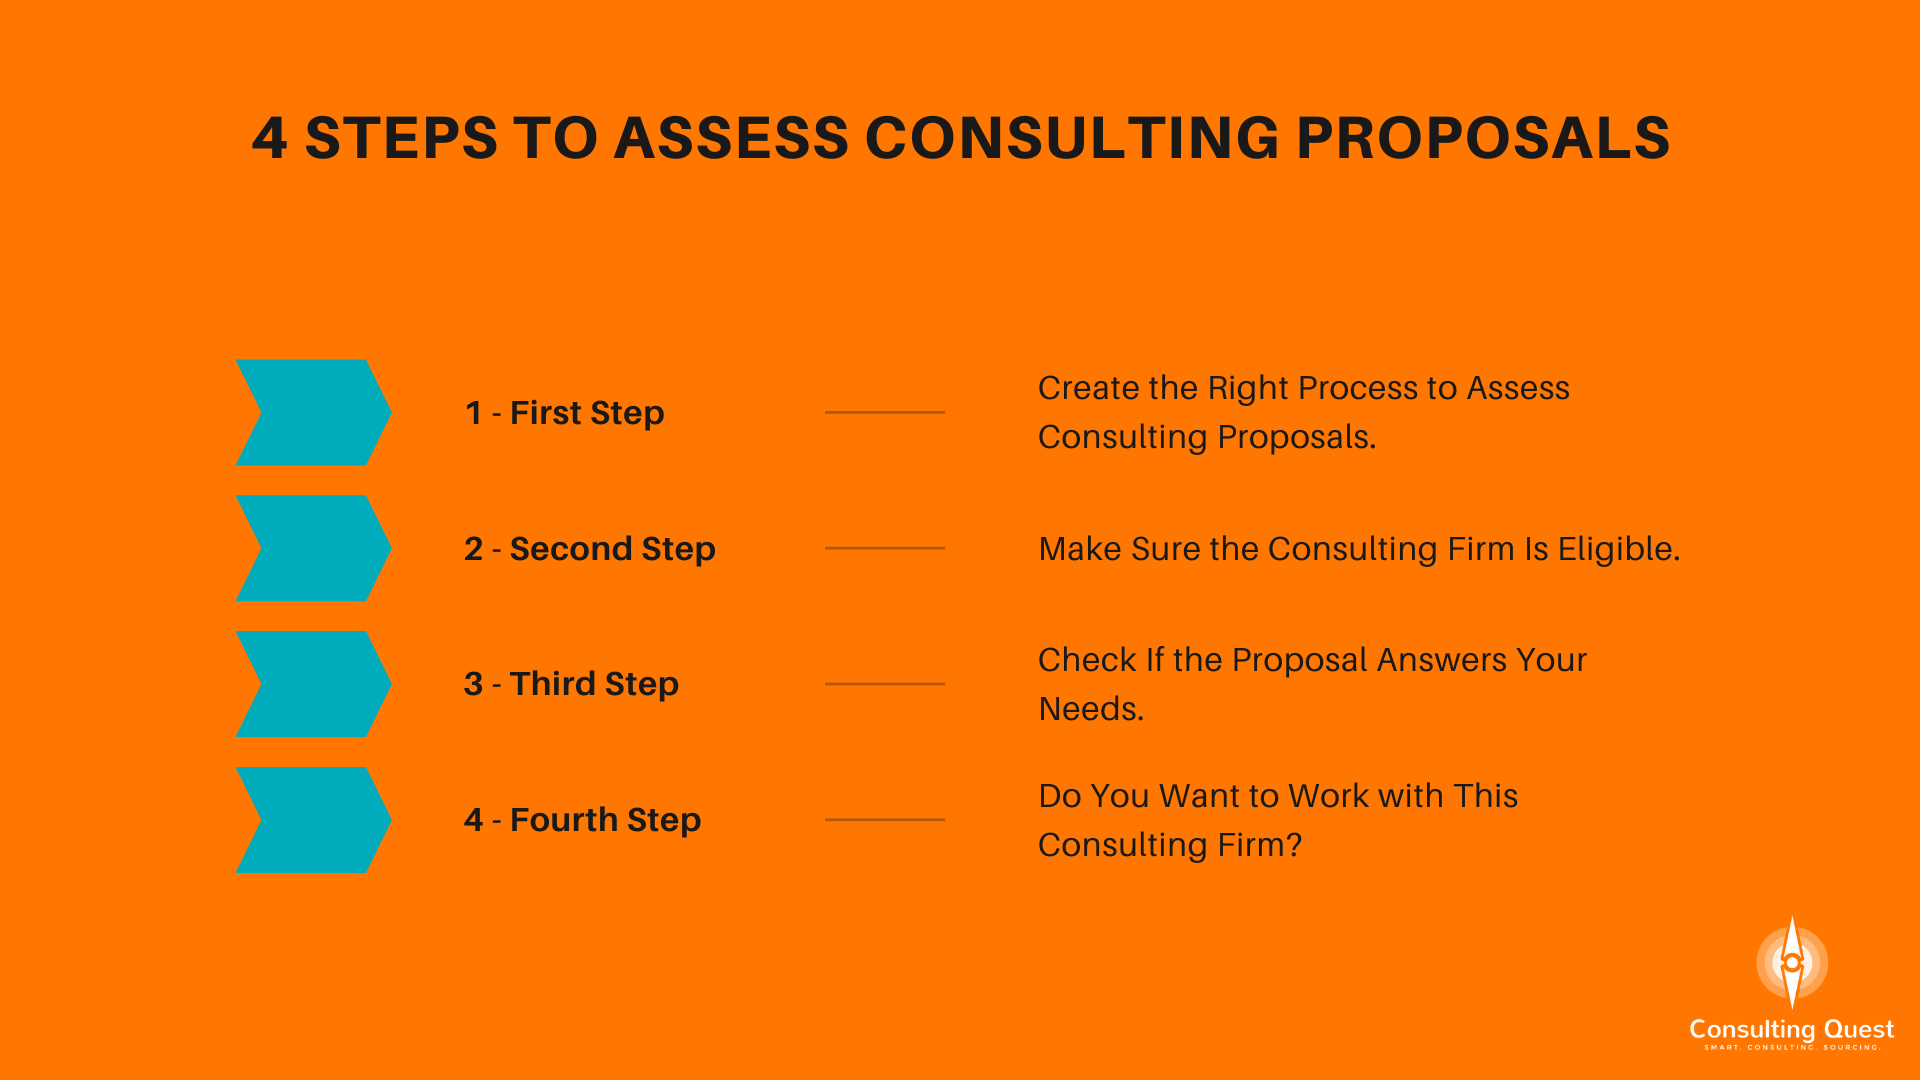 4 steps to assess consulting proposals